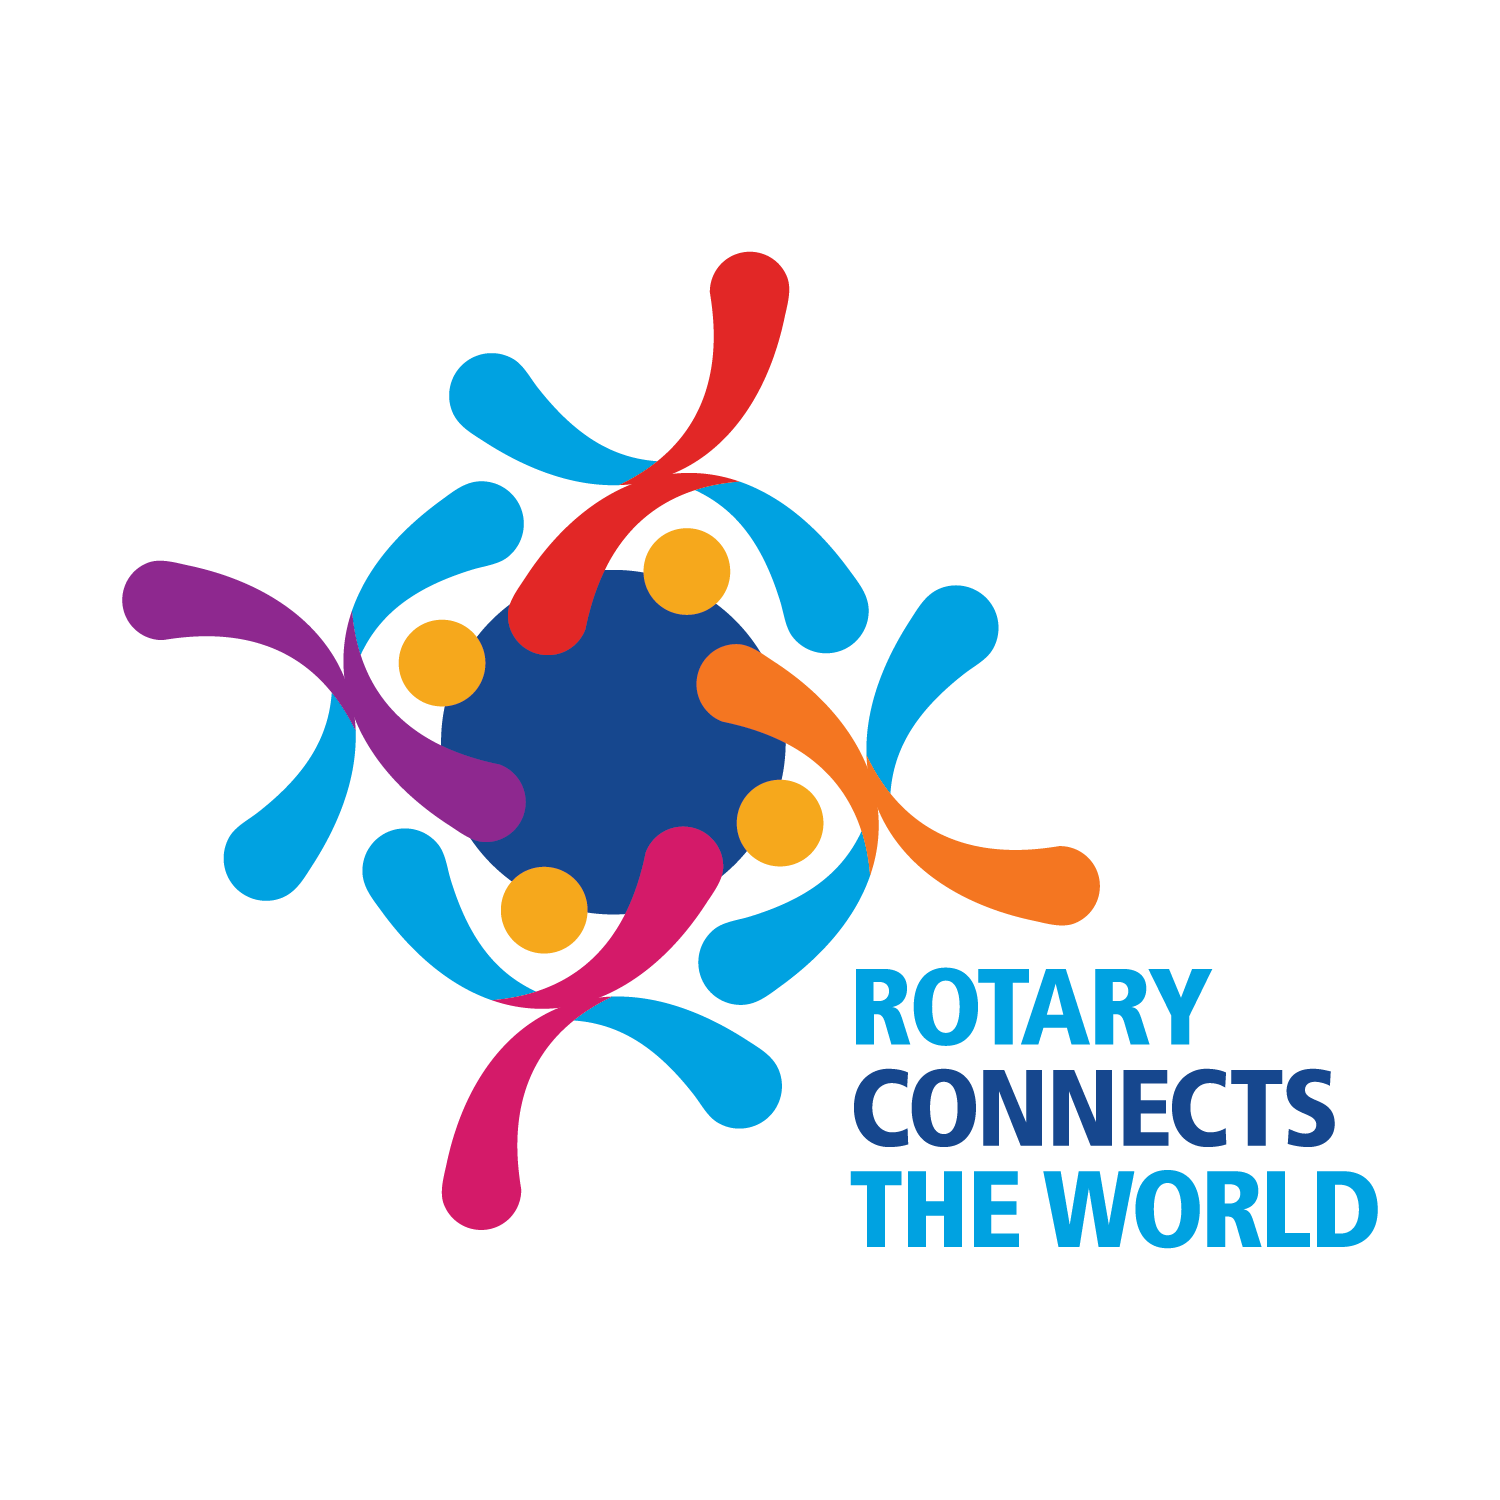 Rotary:
Making a Difference